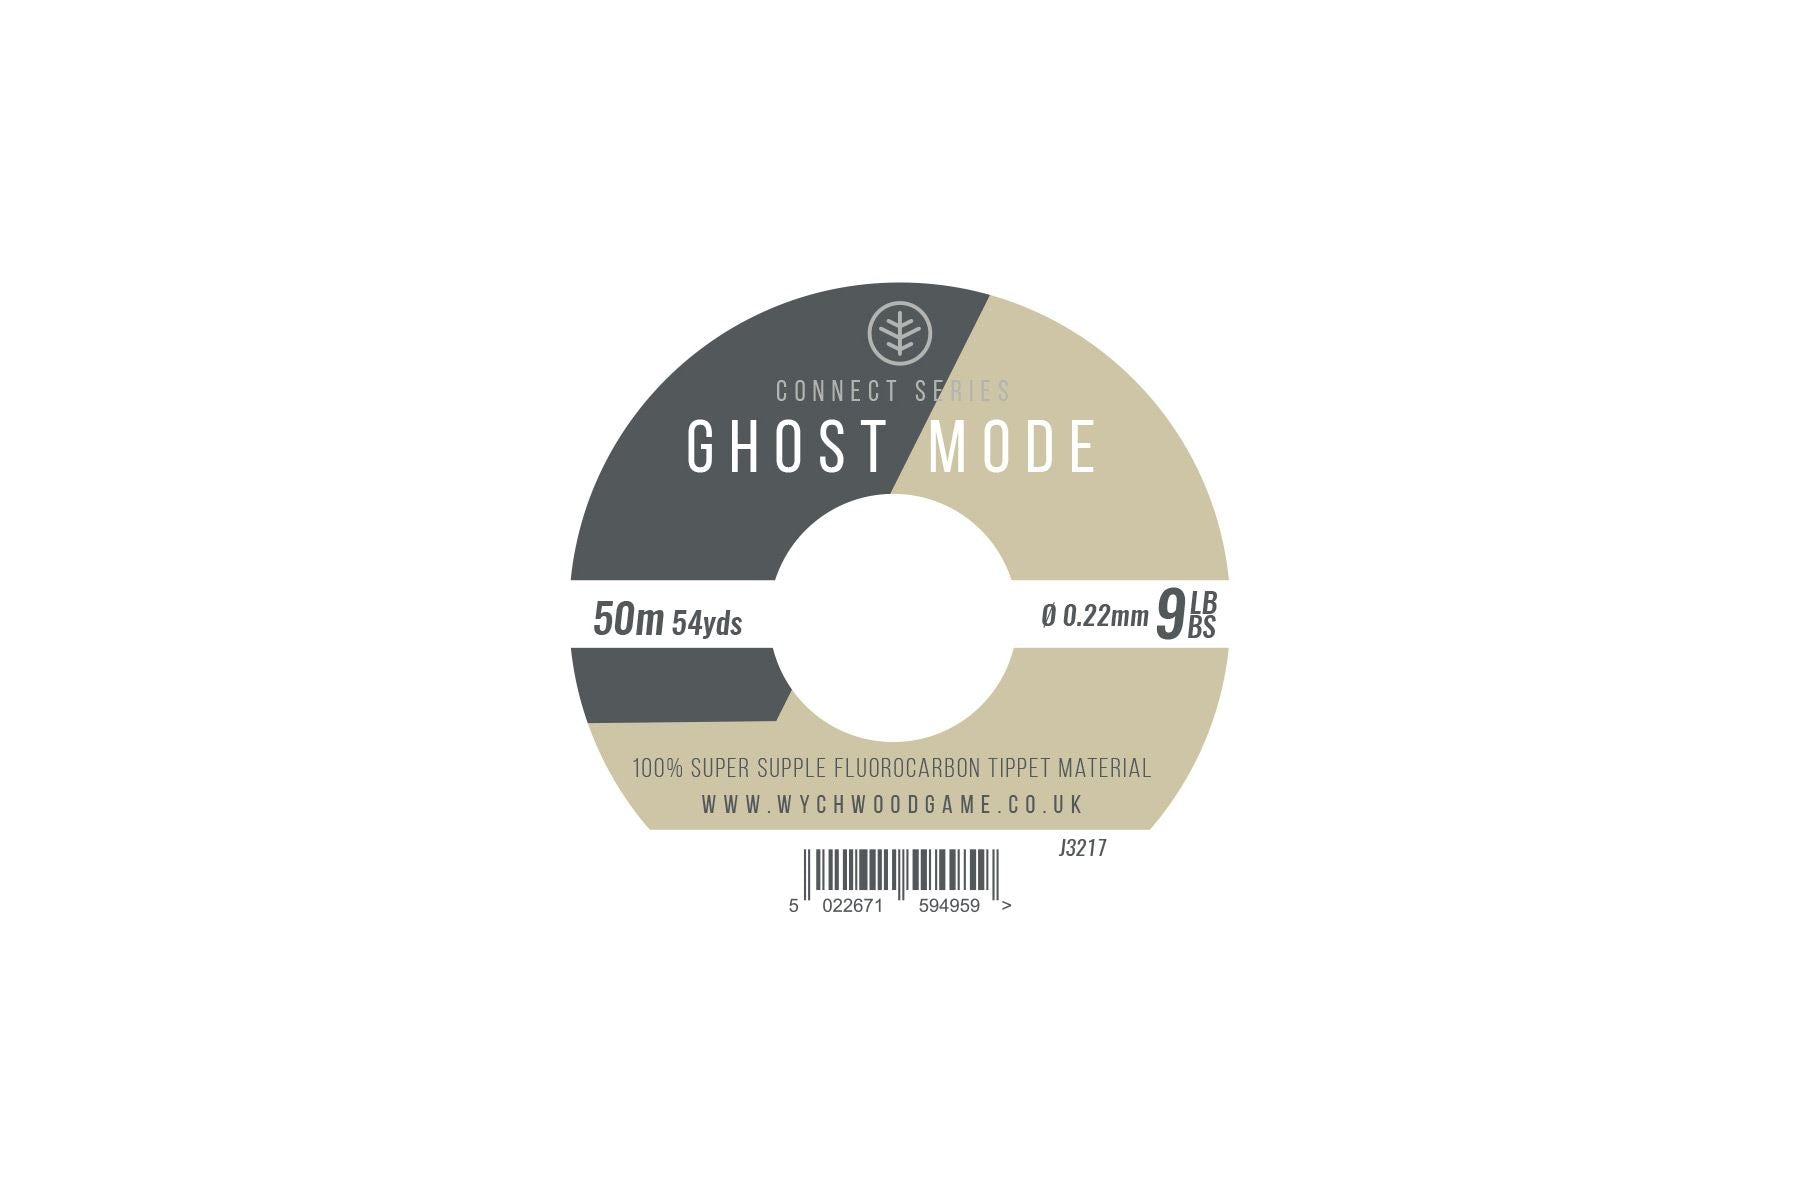 Wychwood Ghost Mode Fluorocarbon 50m Tippet 9lb